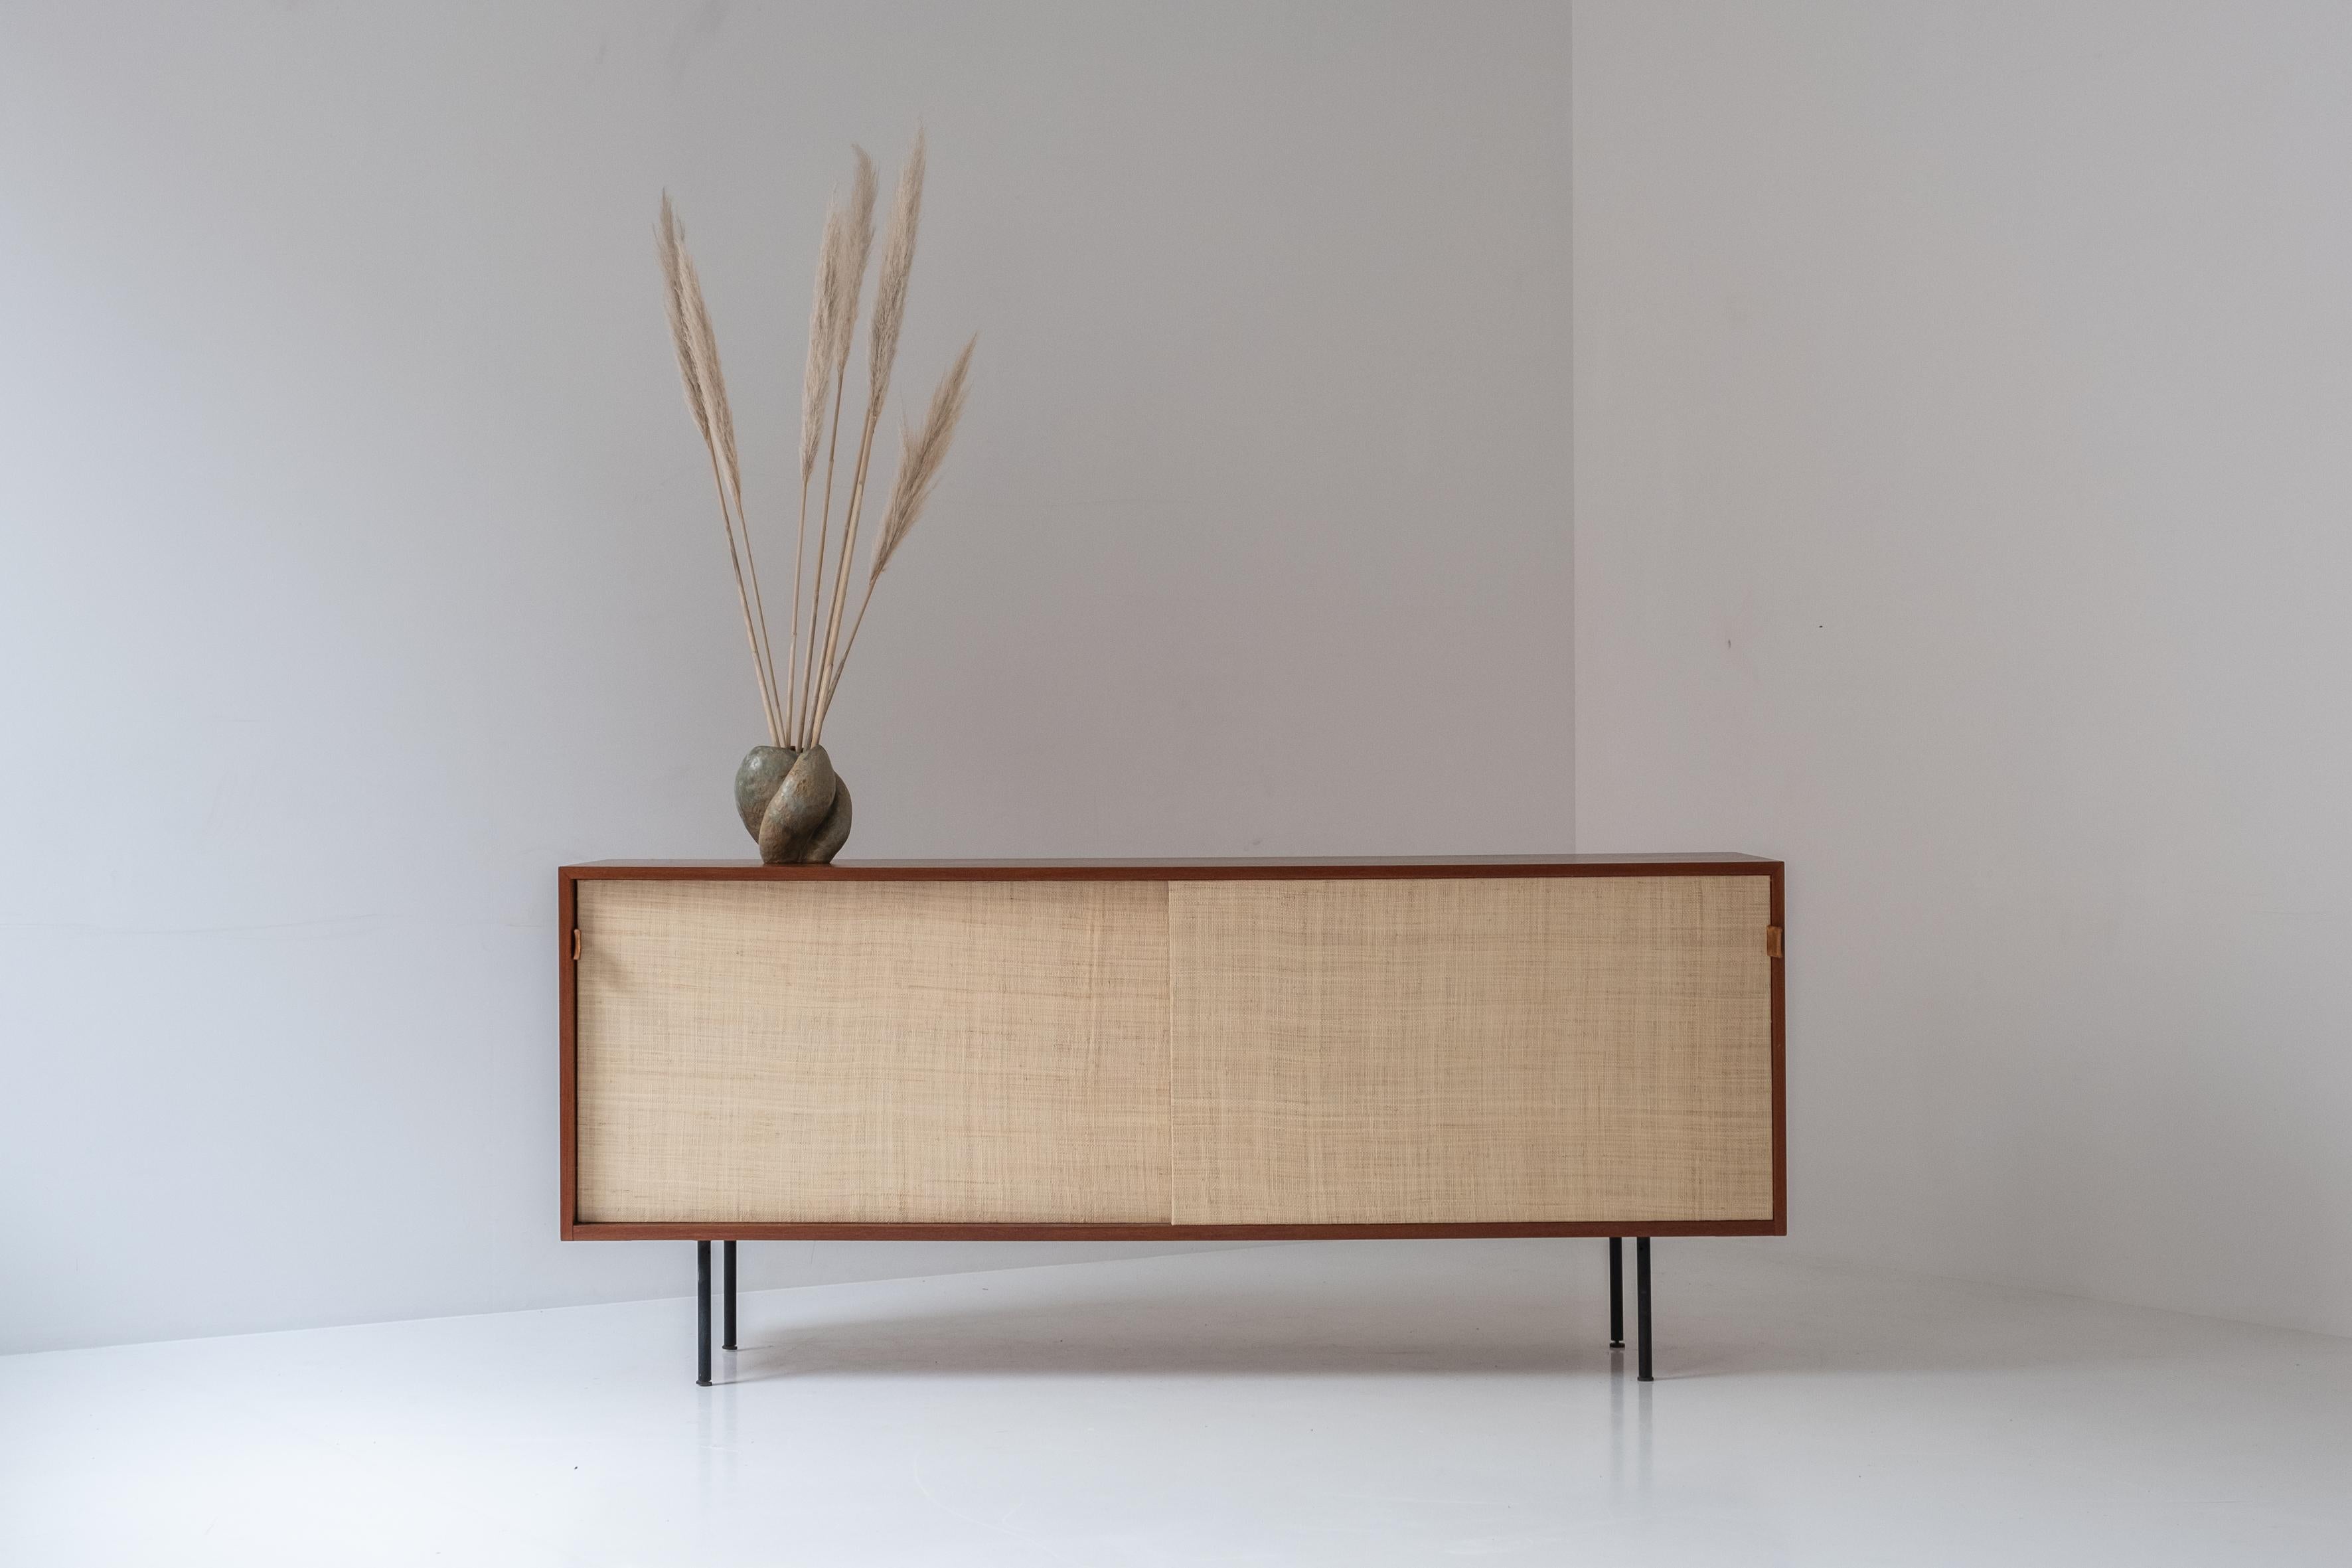 Lovely sideboard by Florence Knoll for Knoll international, USA 1950s. This sideboard is model 116 and is made out of teak wood. The two seagrass sliding doors features patinated cognac leather handles covering a maple interior on the inside. This